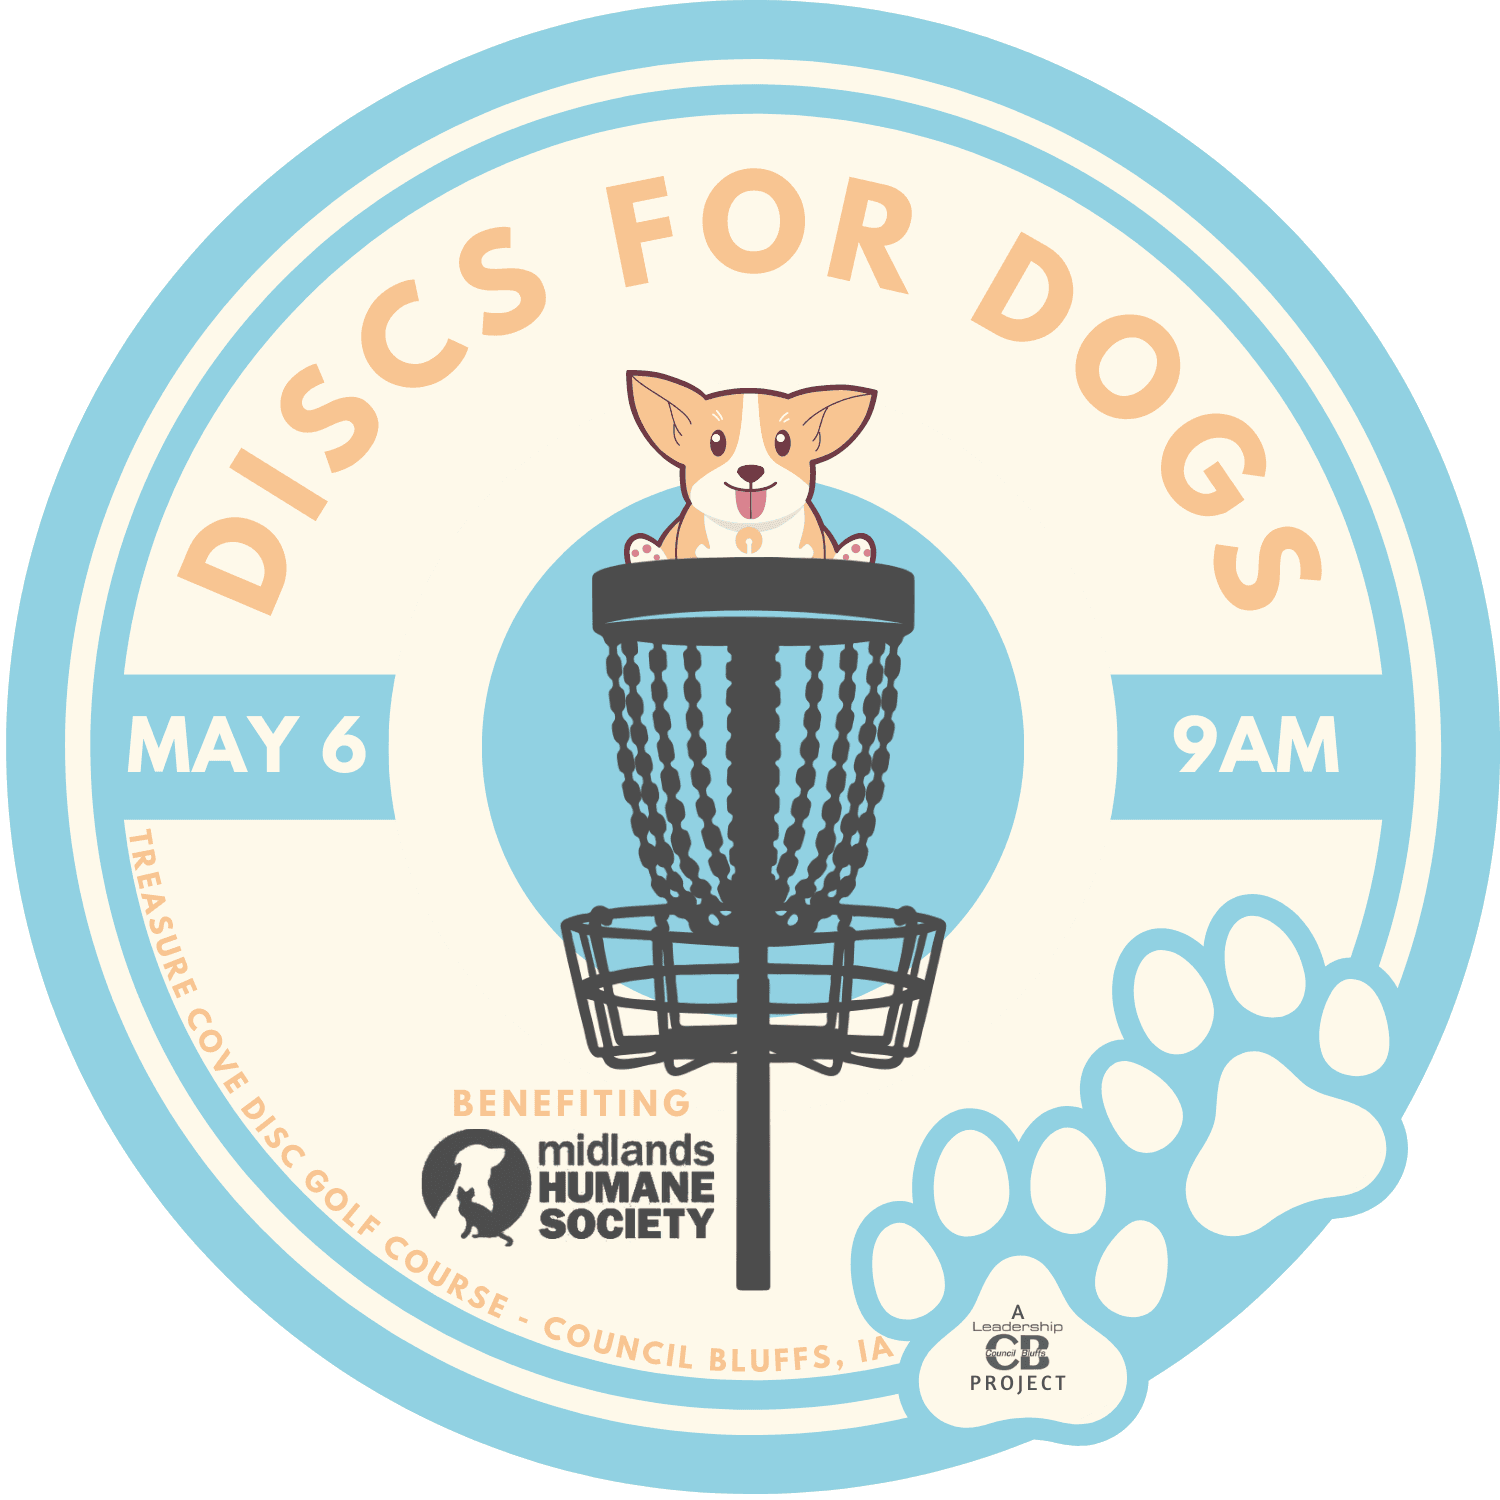 Register for Discs for Dogs!